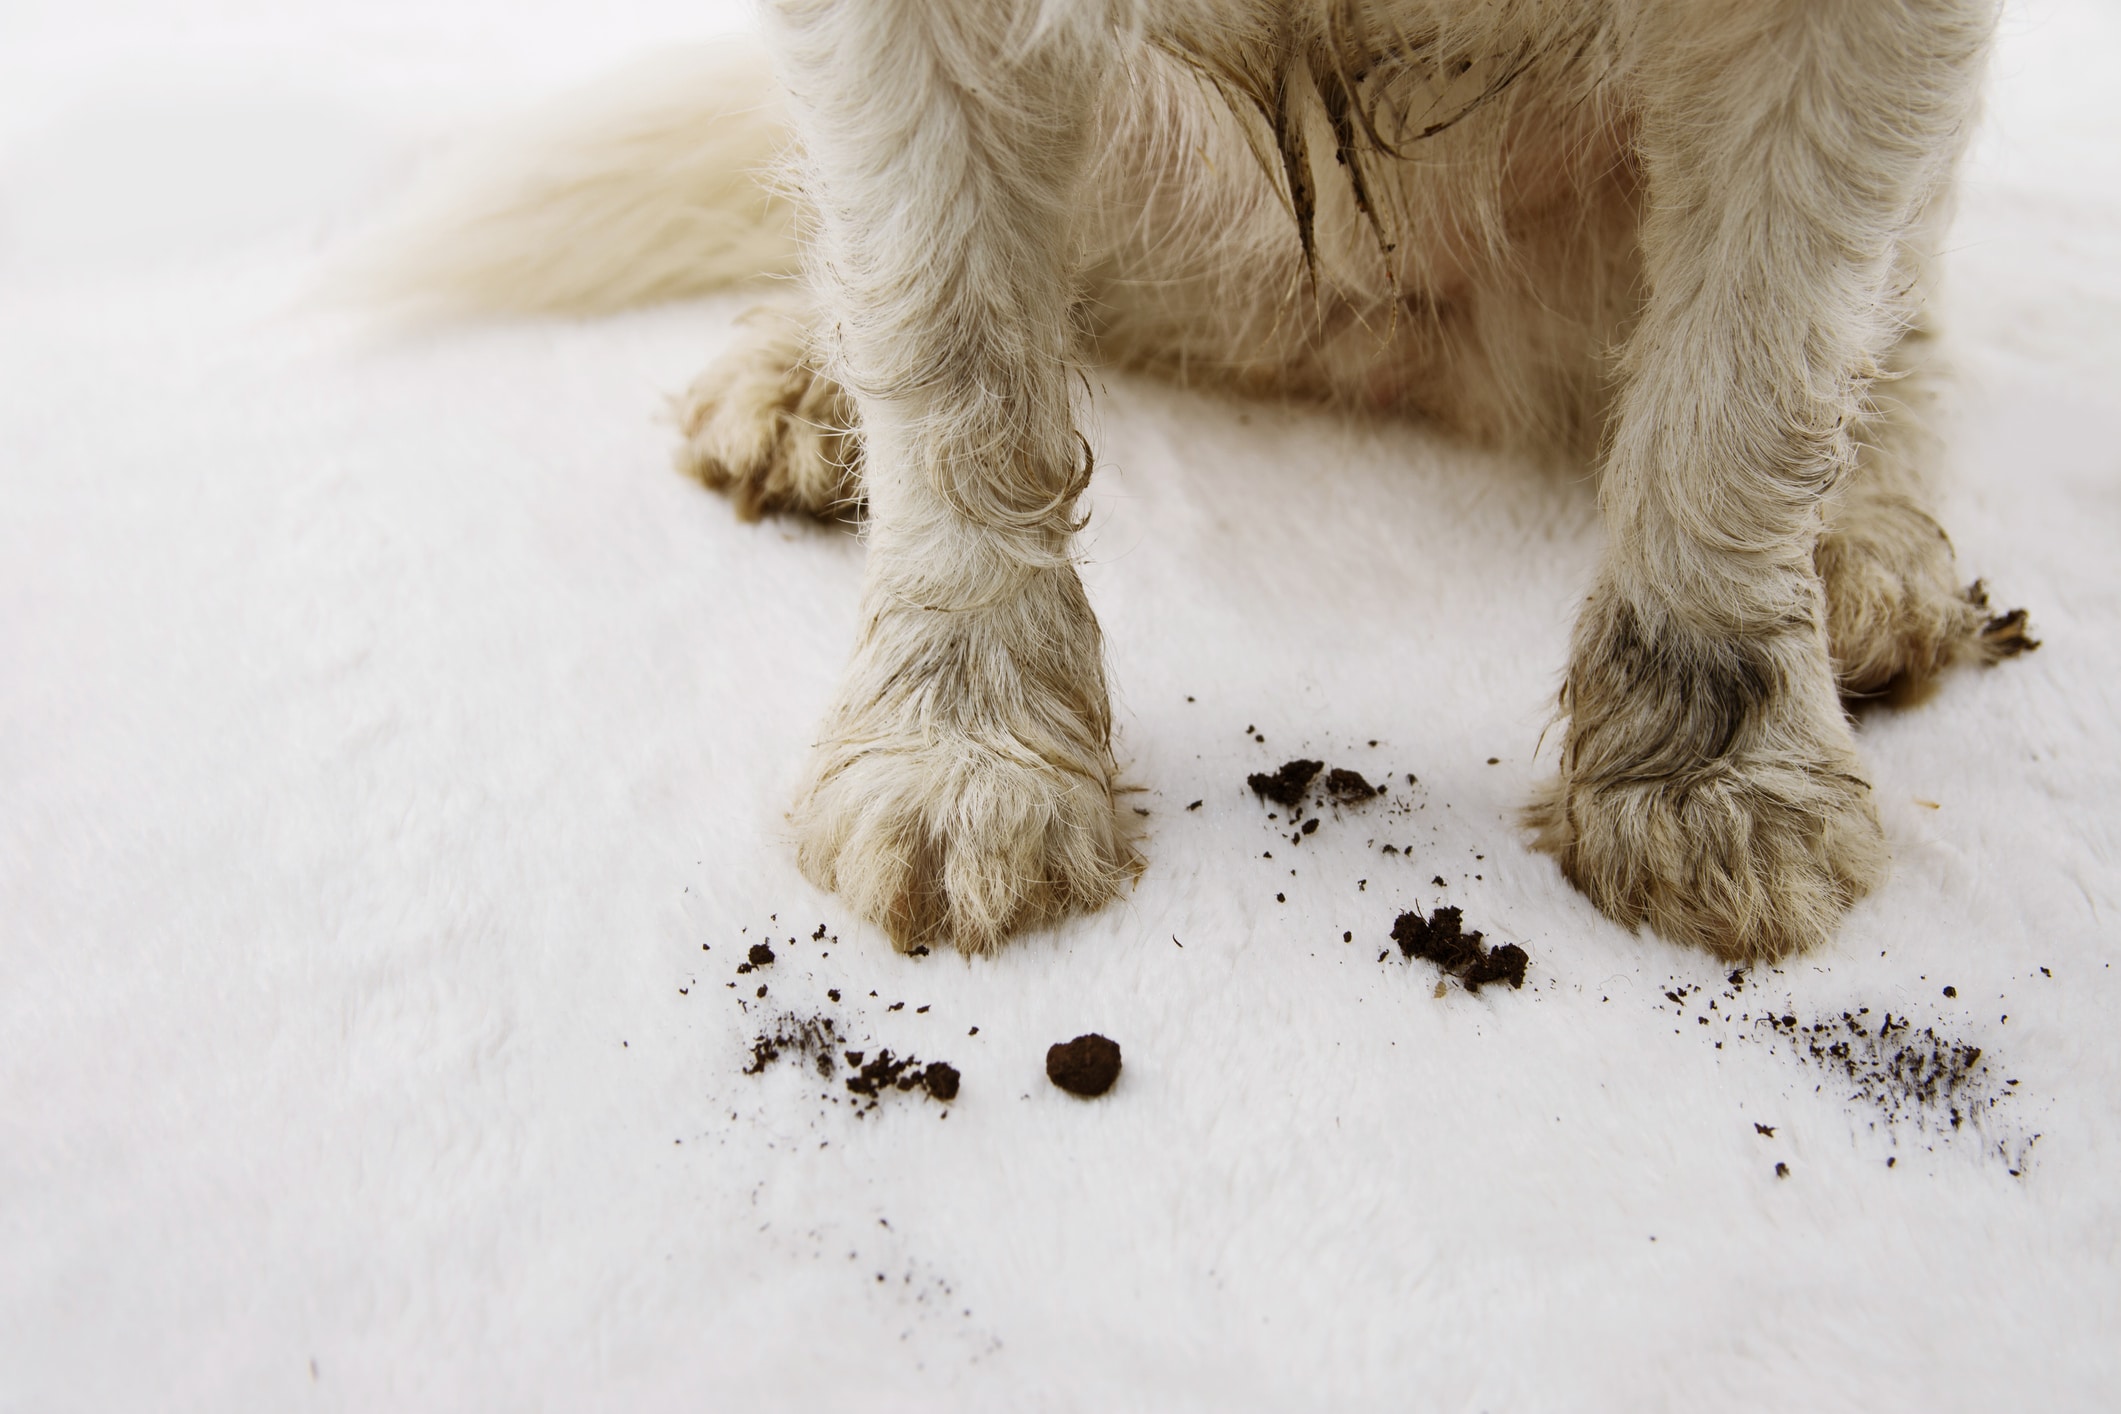 10 Tips for How to Keep Your House Clean With Dogs - Parsnips and Pastries